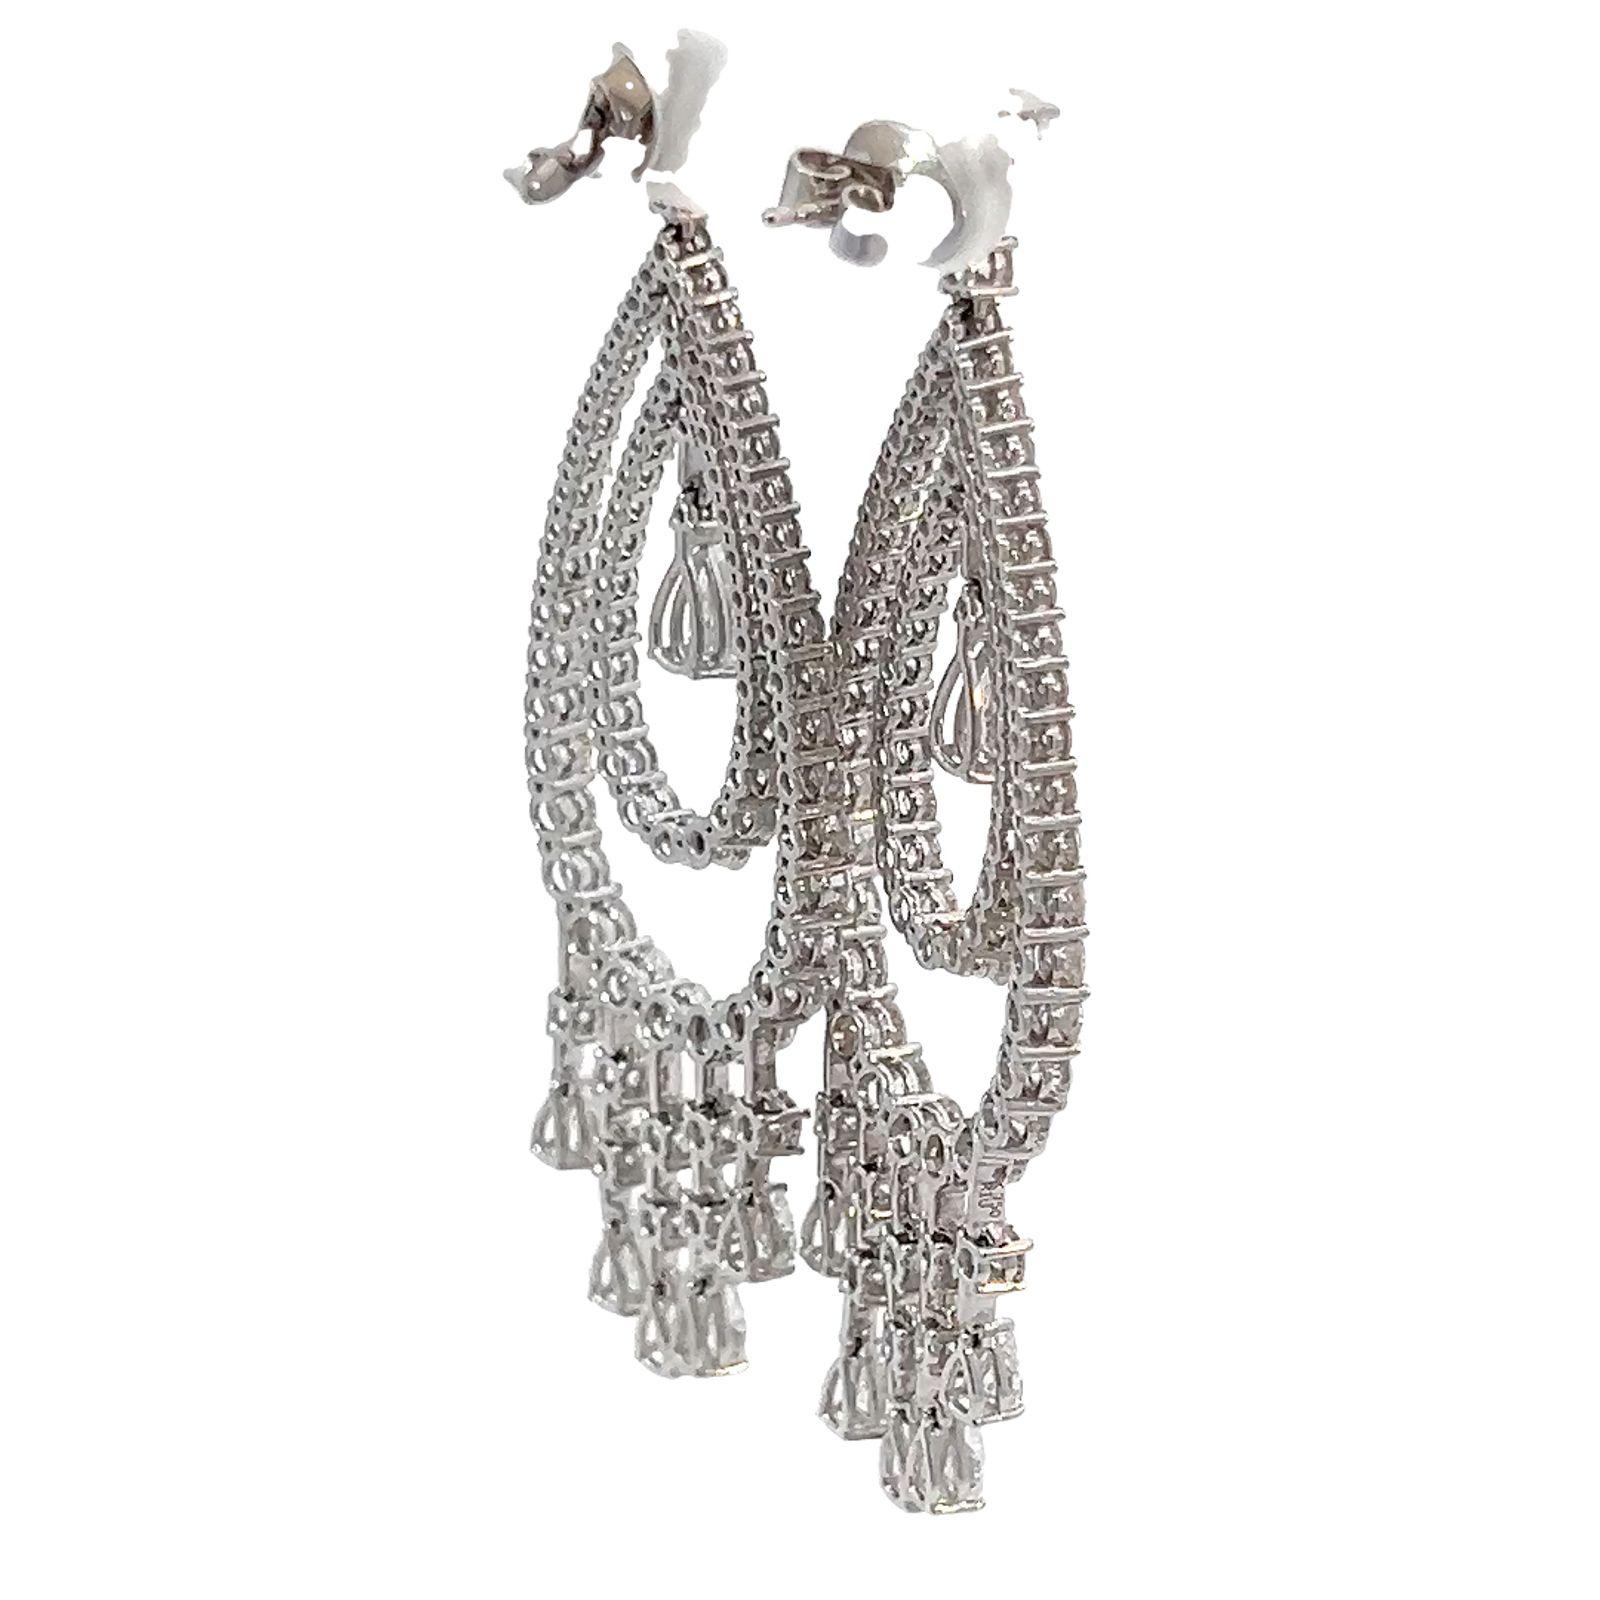 18 karat white gold 10.14 carat diamond dangle chandelier earrings. These dazzling pair of statement chandelier earrings exhibit beautiful movement and sparkle.  
With a total carat weight of 10.14 carats, these earrings are designed with an array